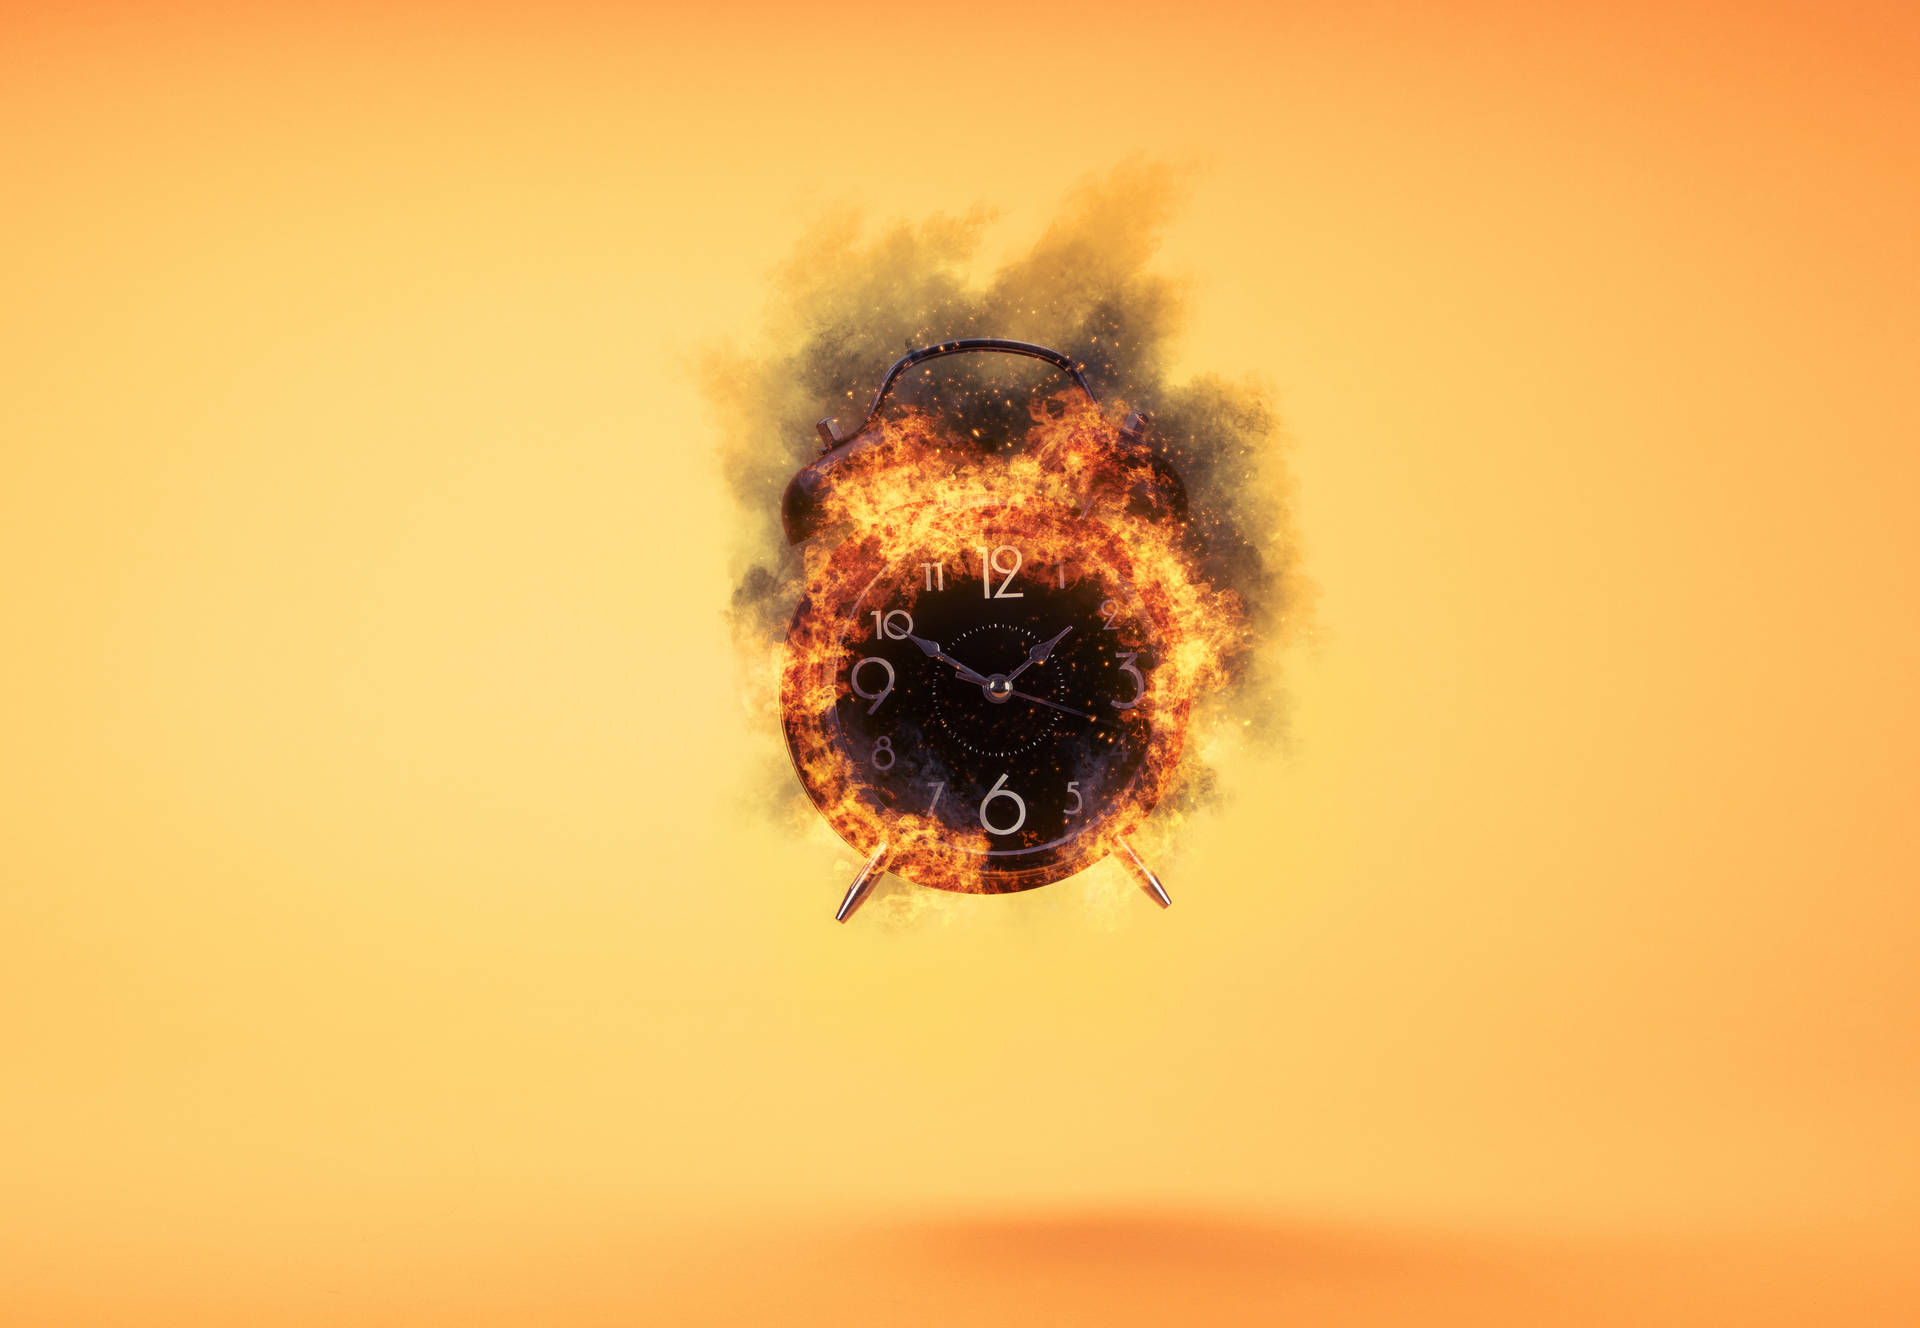 Clock Time On Fire Wallpaper